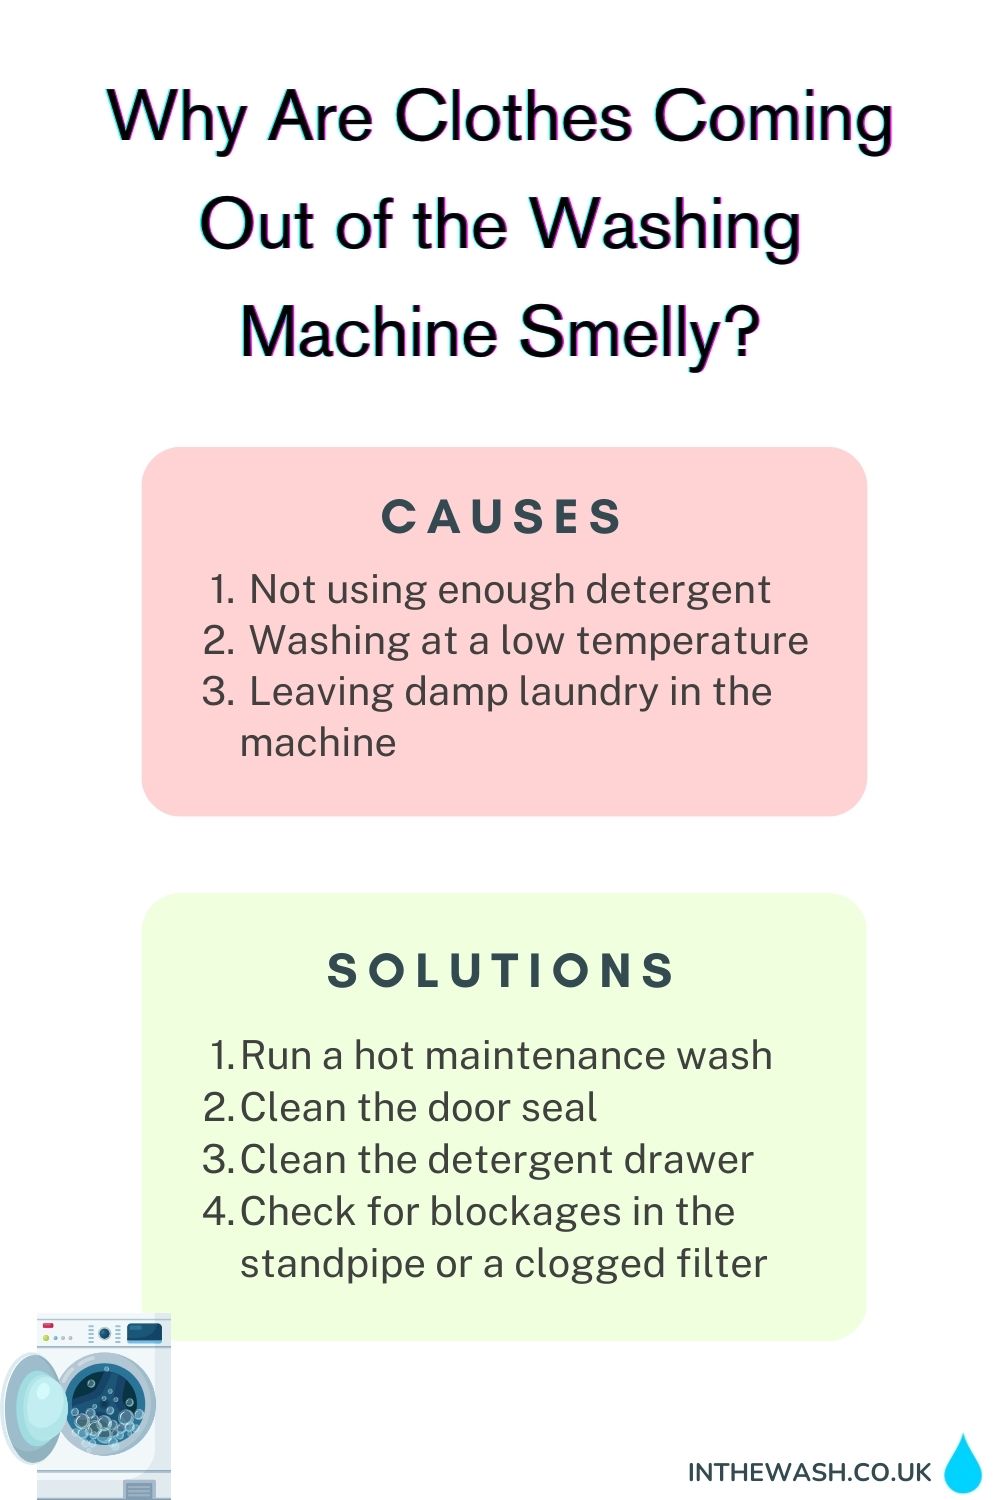 Why Are Clothes Coming Out of the Washing Machine Smelly?